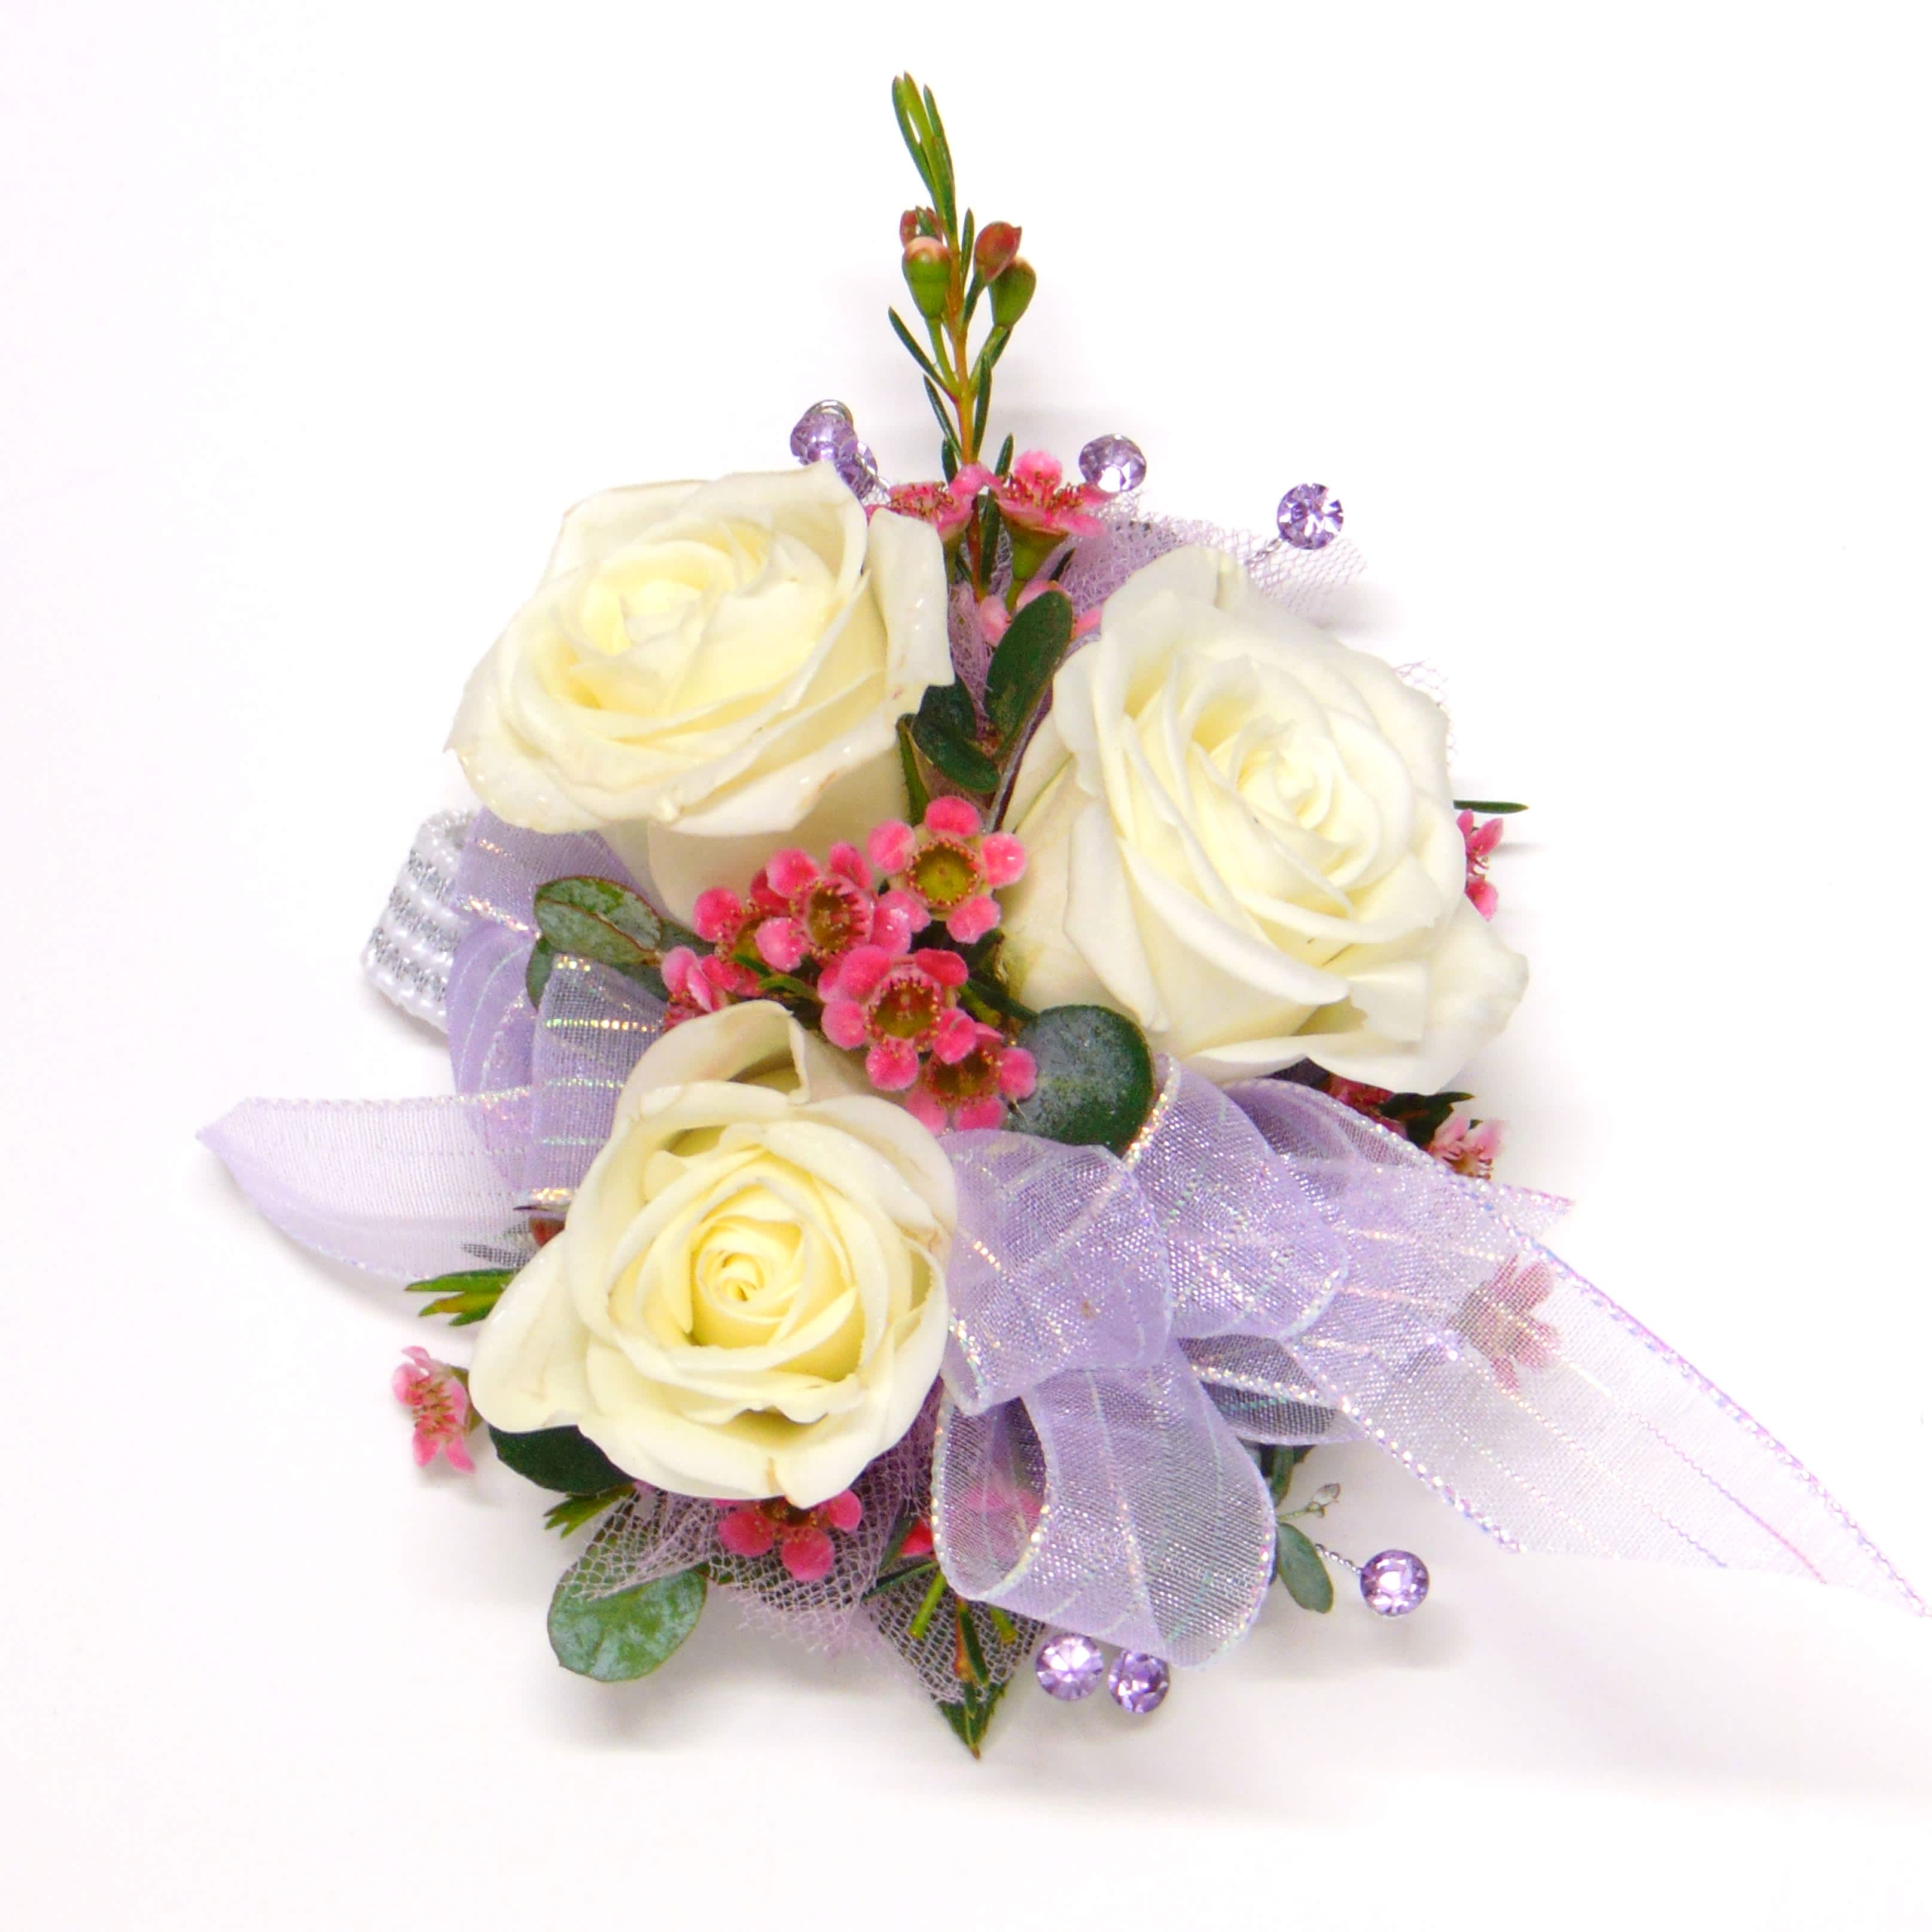 White Rose Wrist Corsage-Lavender Accents - Three white spray roses, lavender ribbon &amp; bling, purple waxflower, myrtle greens on a standard wristlet. Deluxe option includes a beaded wristlet. Includes corsage box.